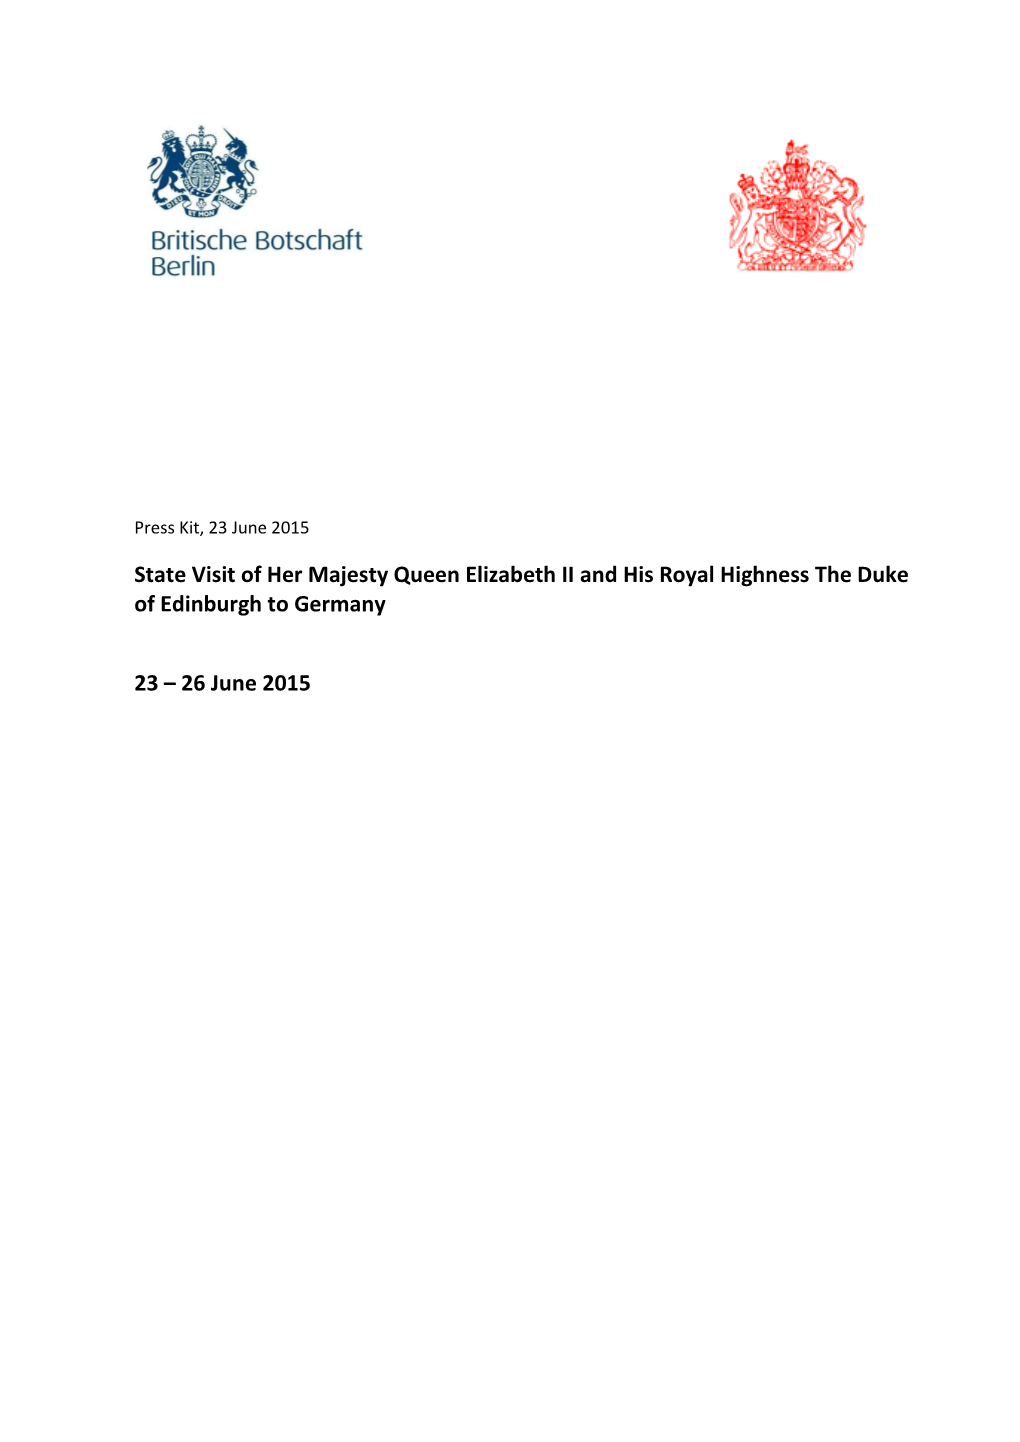 State Visit of Her Majesty Queen Elizabeth II and His Royal Highness the Duke of Edinburgh to Germany